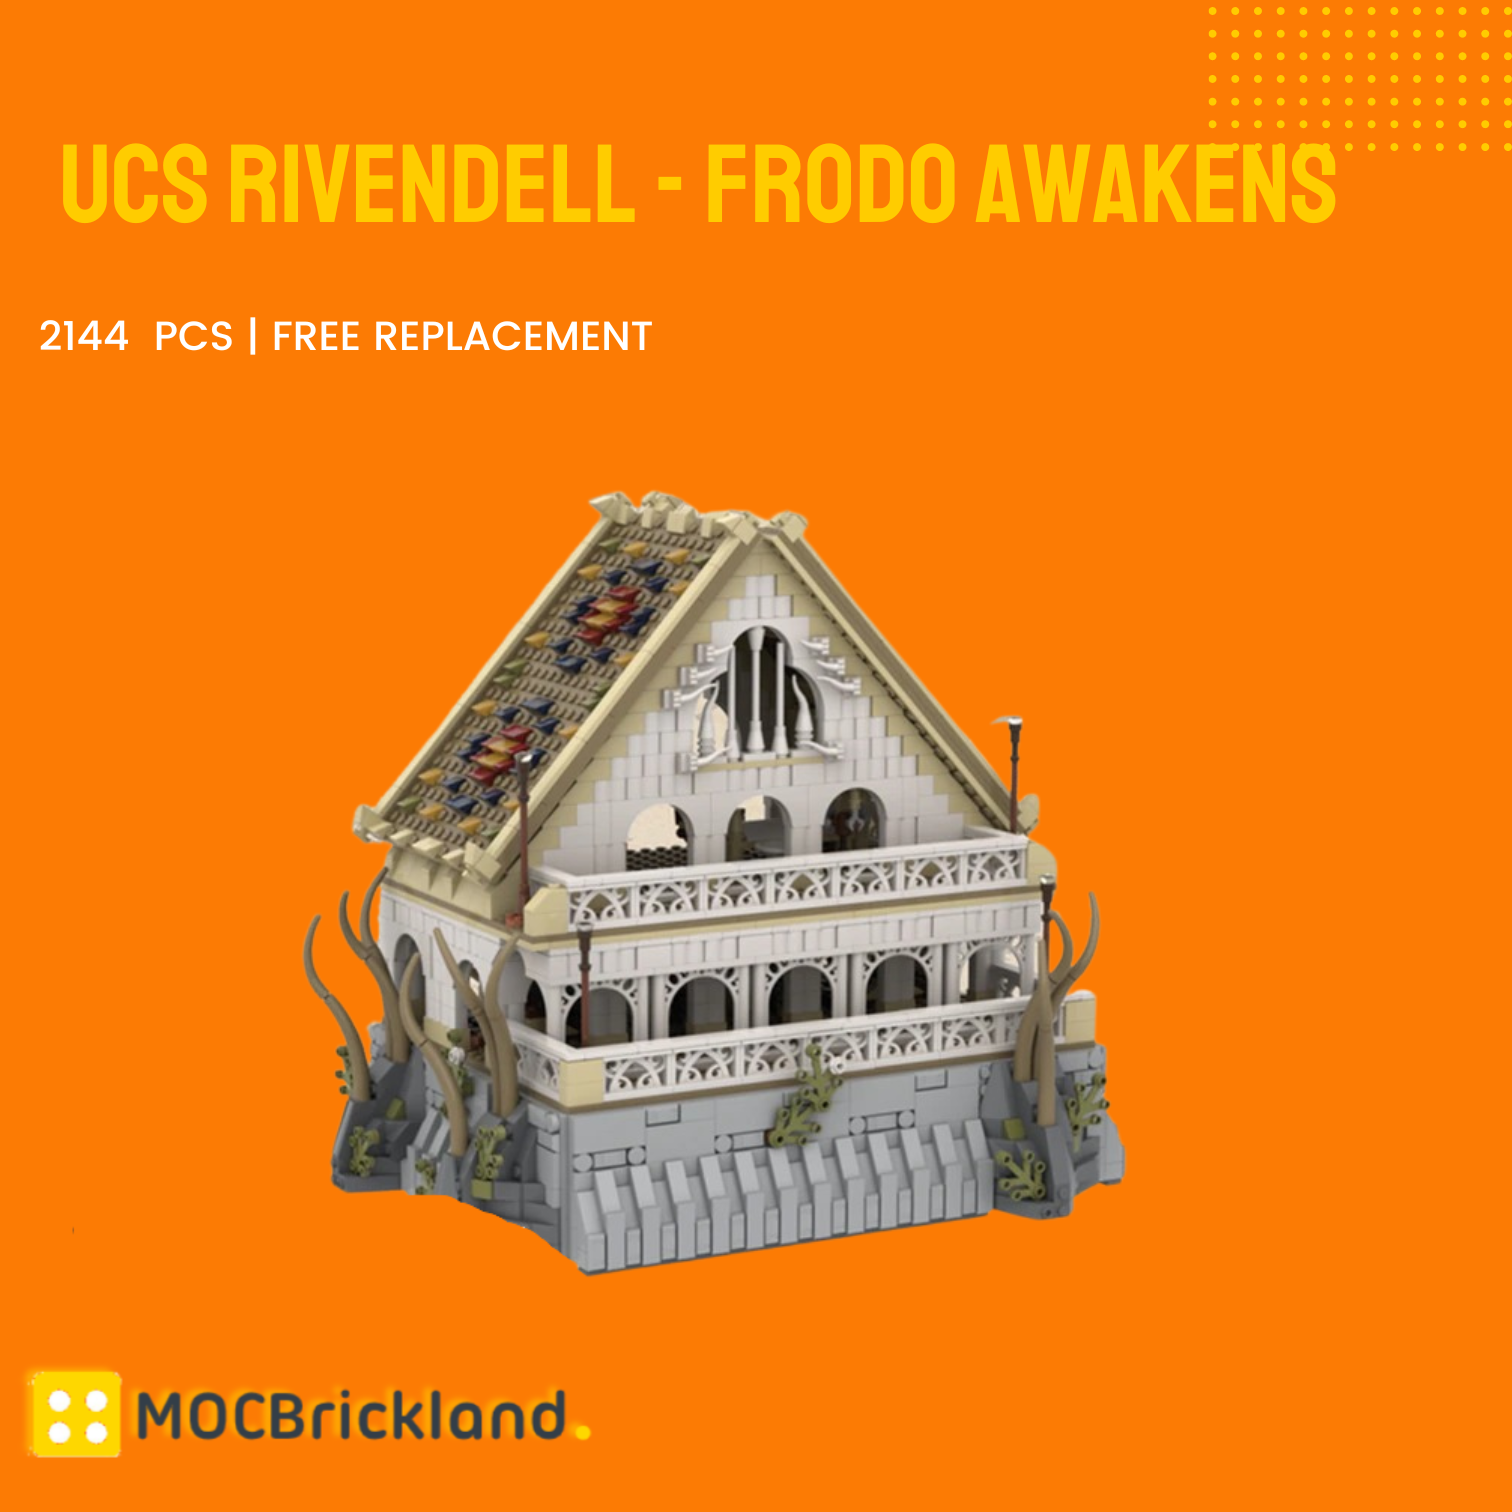 UCS Rivendell - Frodo Awakens MOC-54957 Modular Building With 2144 Pieces